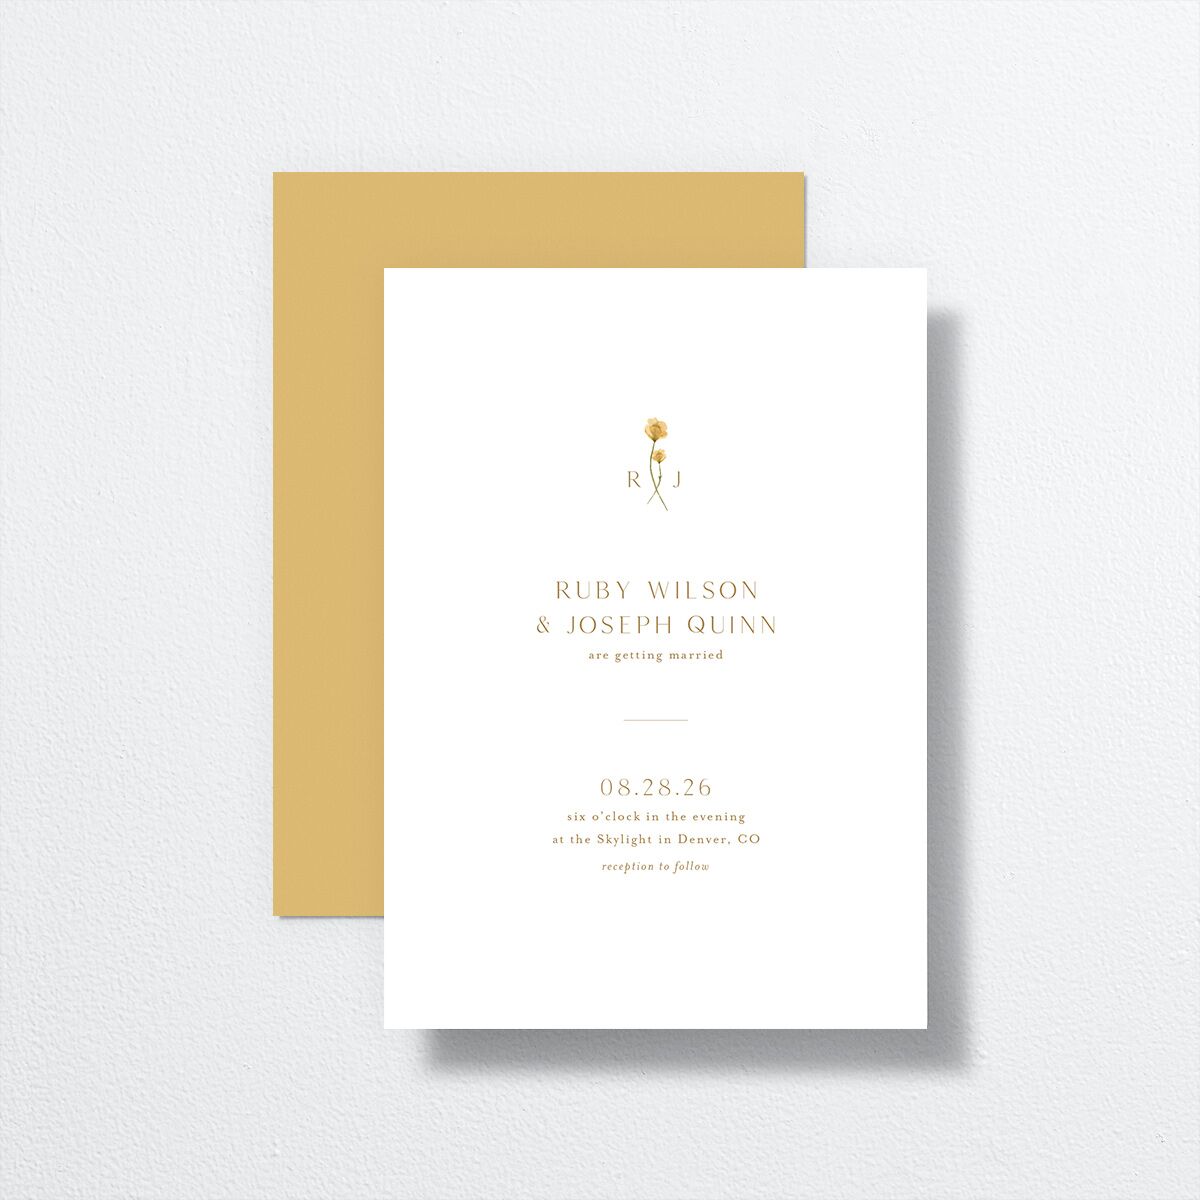 Dainty Monogram Wedding Invitations front-and-back